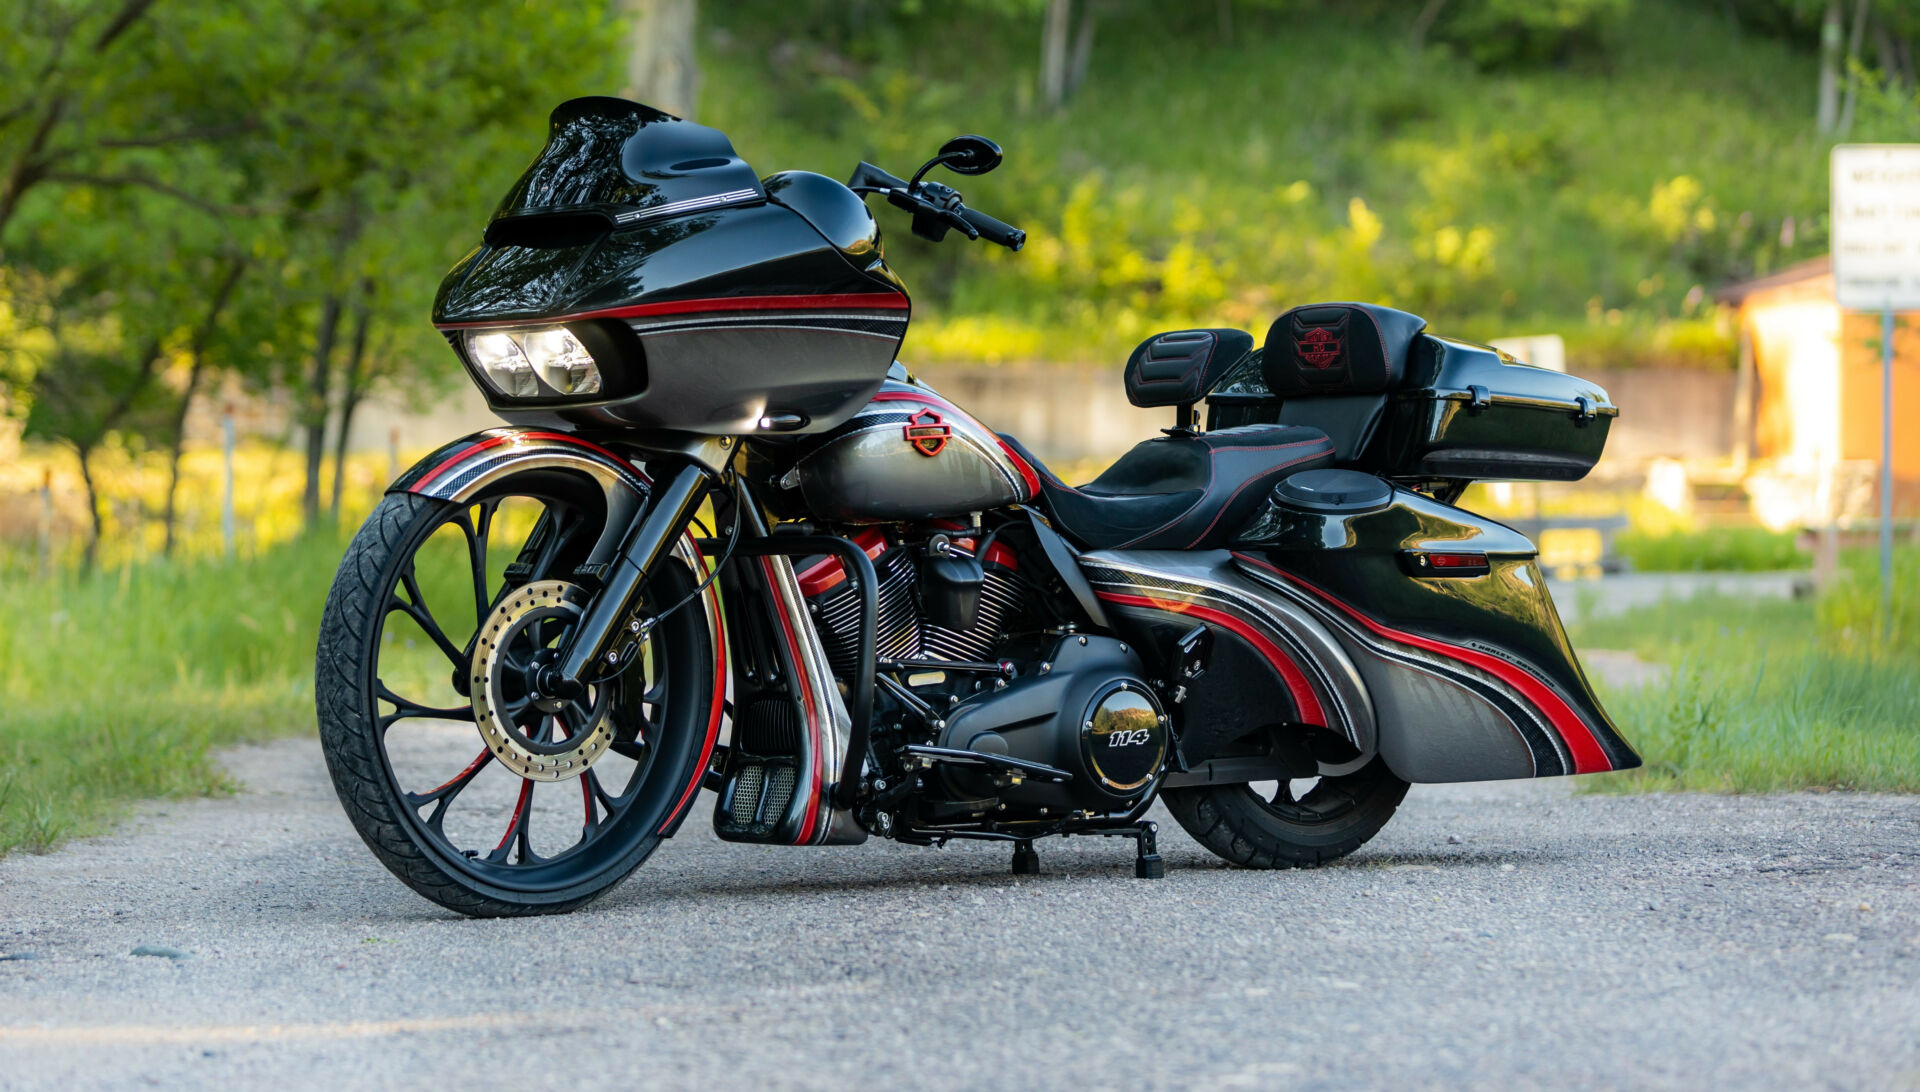 The NASCAR Foundation is raffling off this one-of-a-kind 2021 Harley-Davidson Road Glide FLTRXS customized by Steve and Rusty Wallace of Southern Country Customs to benefit All Kids Ride. Photo courtesy All Kids Ride.